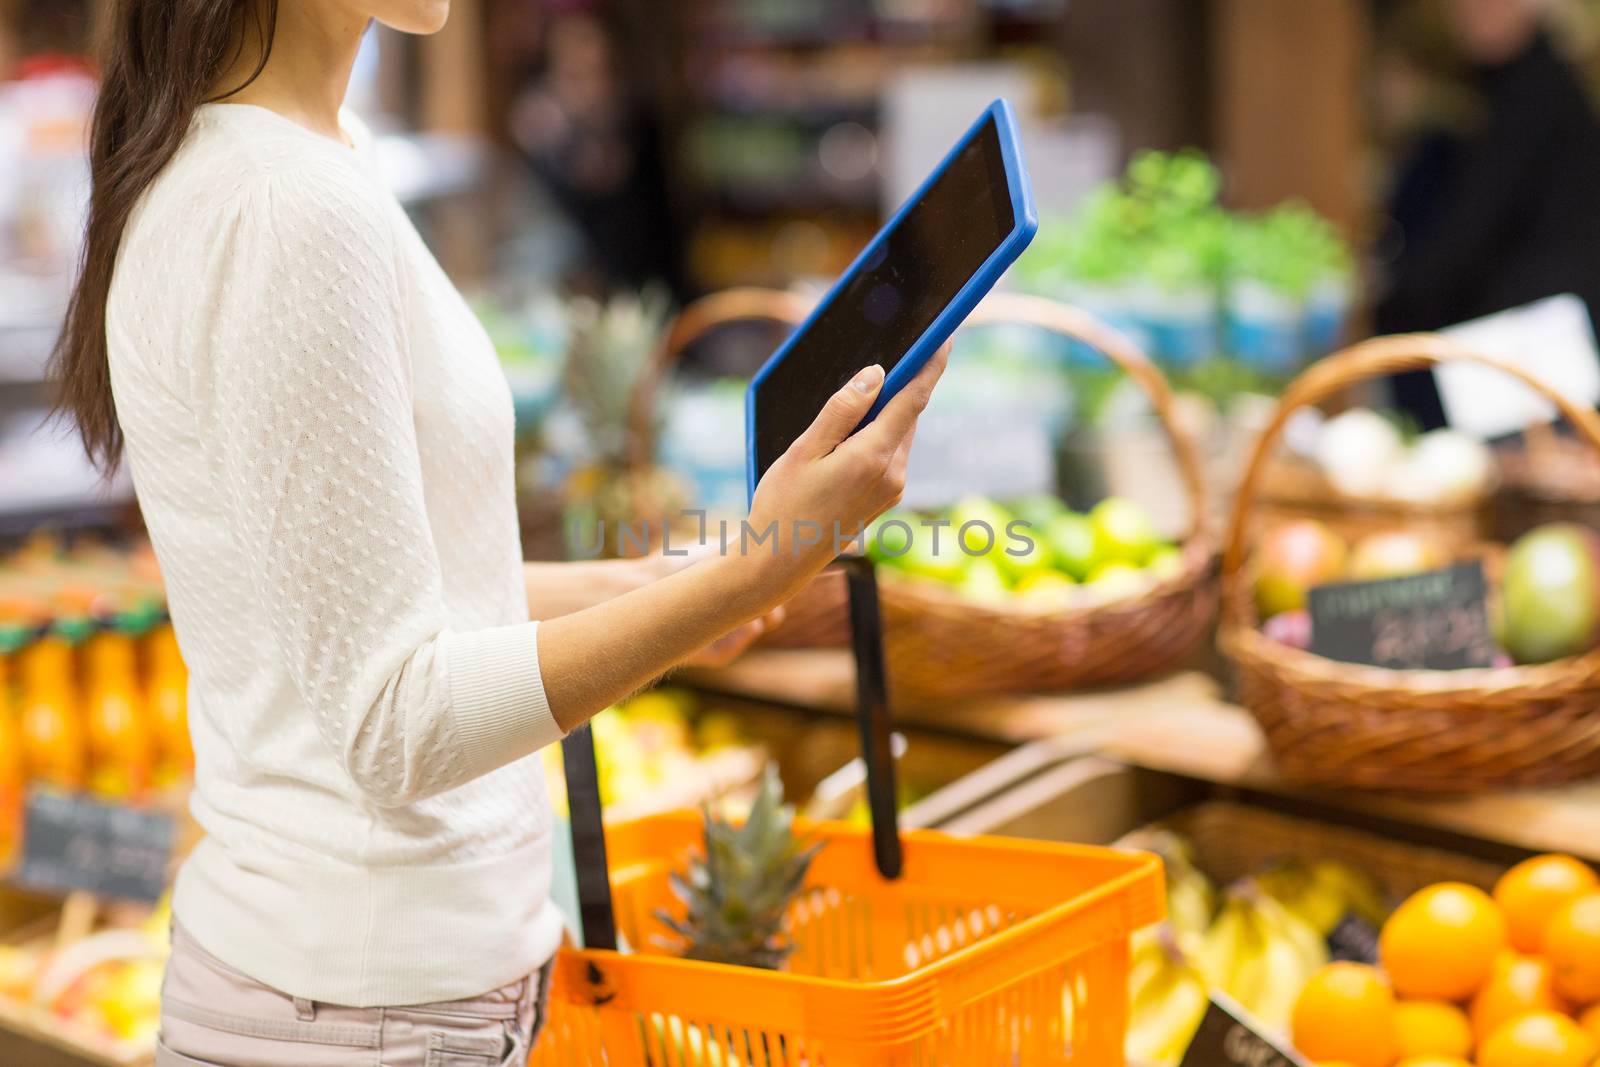 sale, shopping, consumerism and people concept - close up of young woman with food basket and tablet pc computer in market